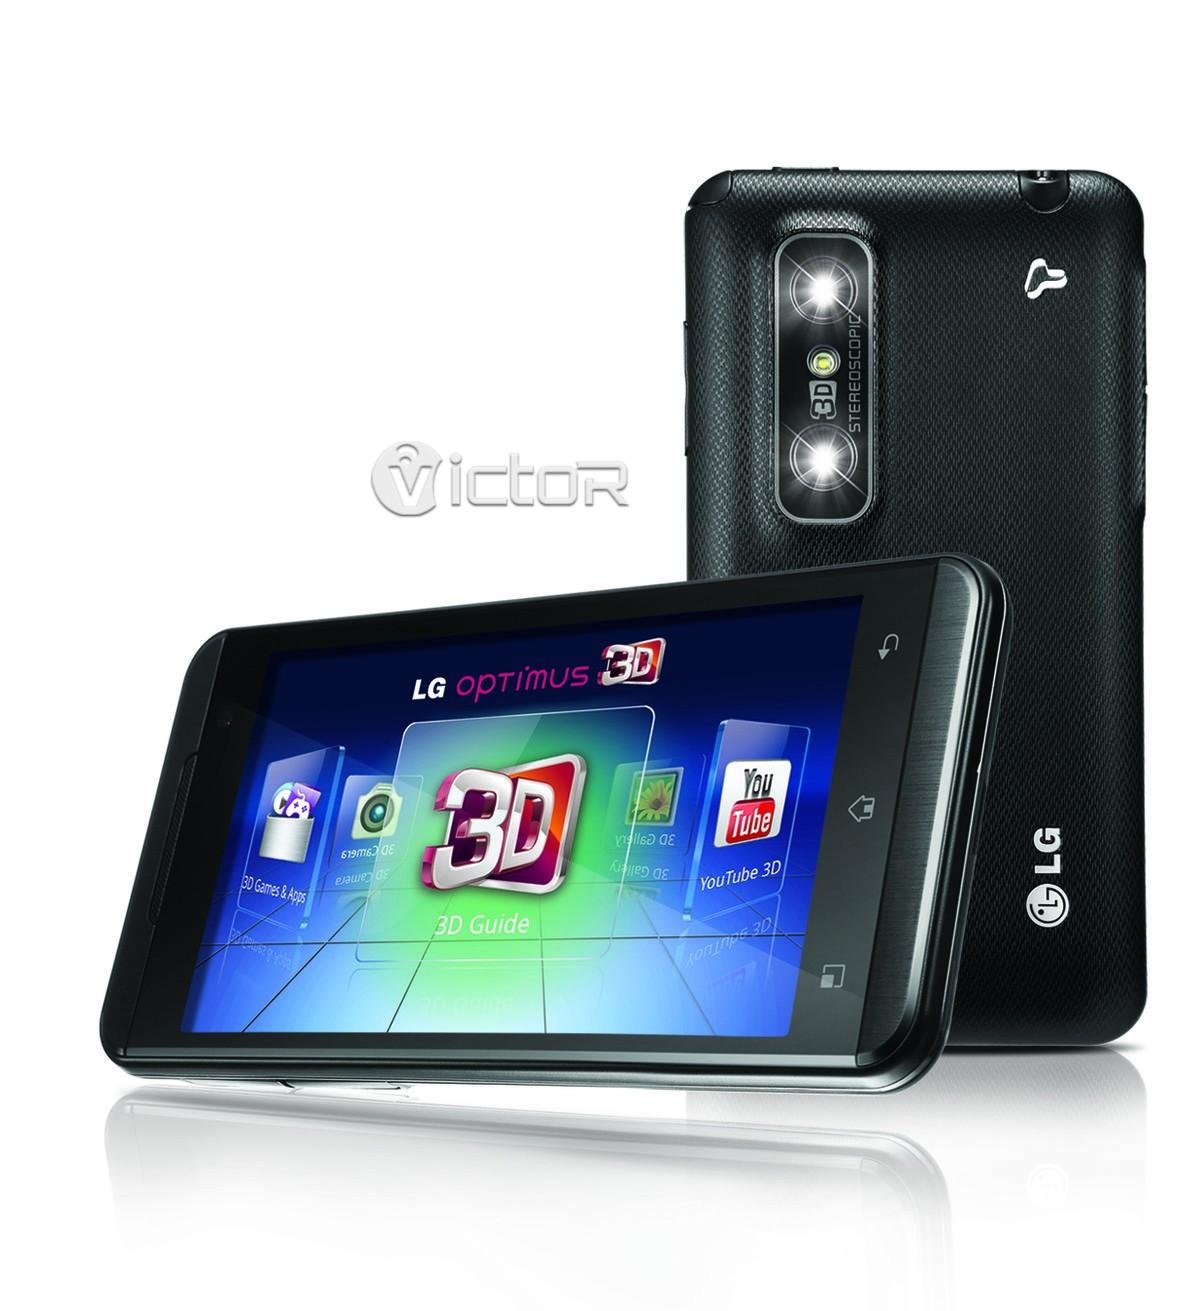 LG Optimus 3D - LG smartphone - first smartphone with dual camera - 1